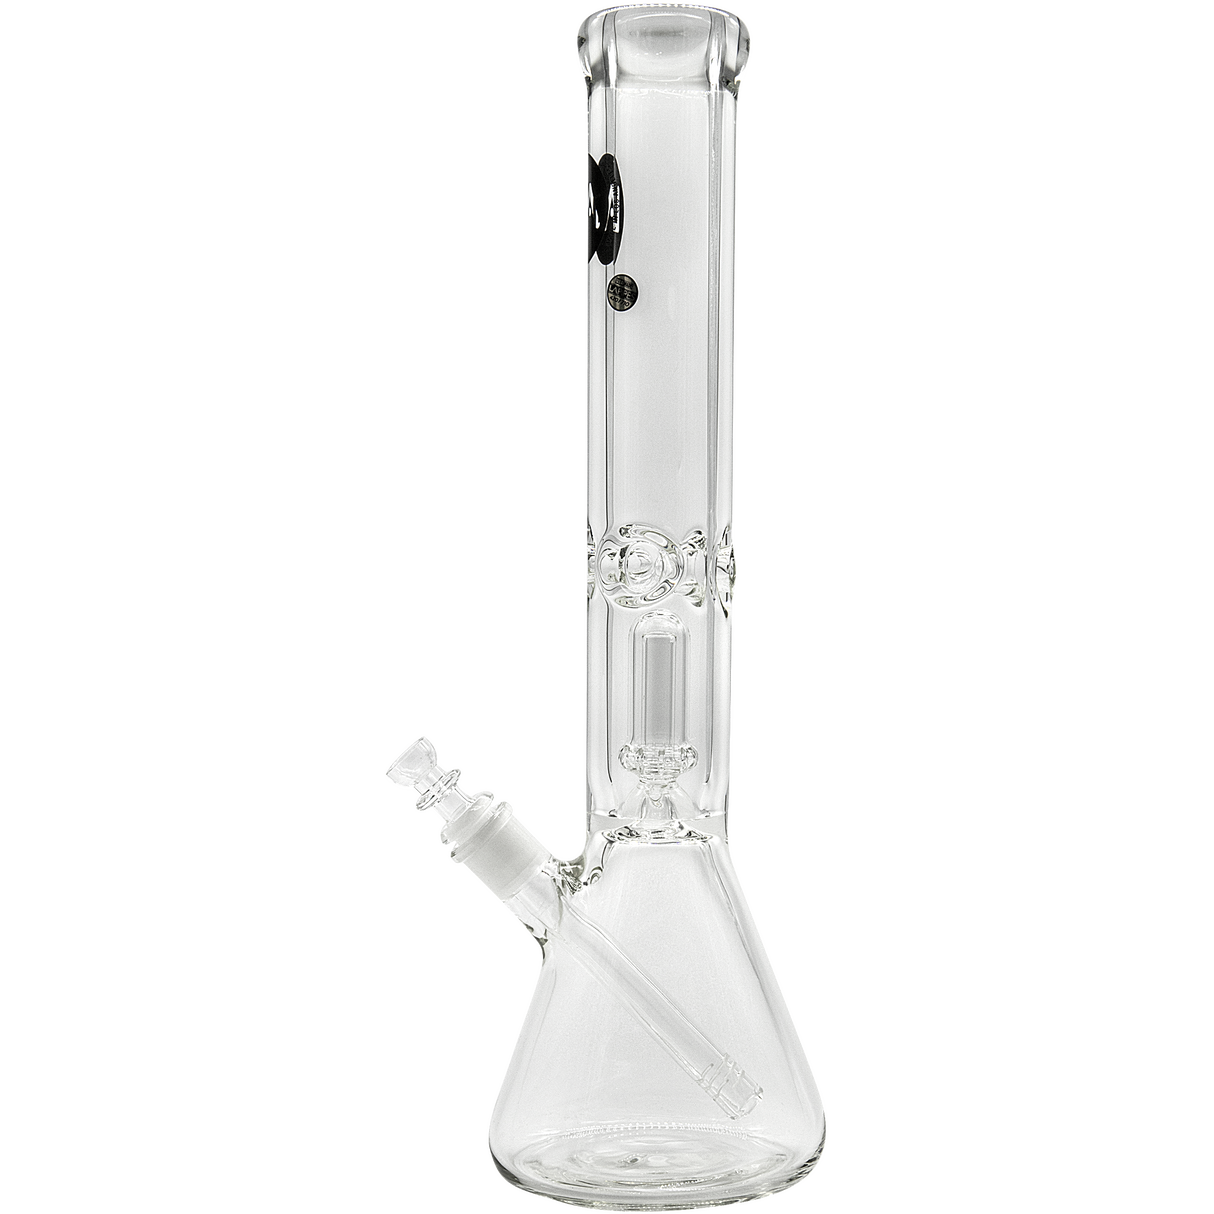 LA Pipes "King Bong" Clear Beaker Bong with Showerhead Percolator, 9mm Thick, Front View